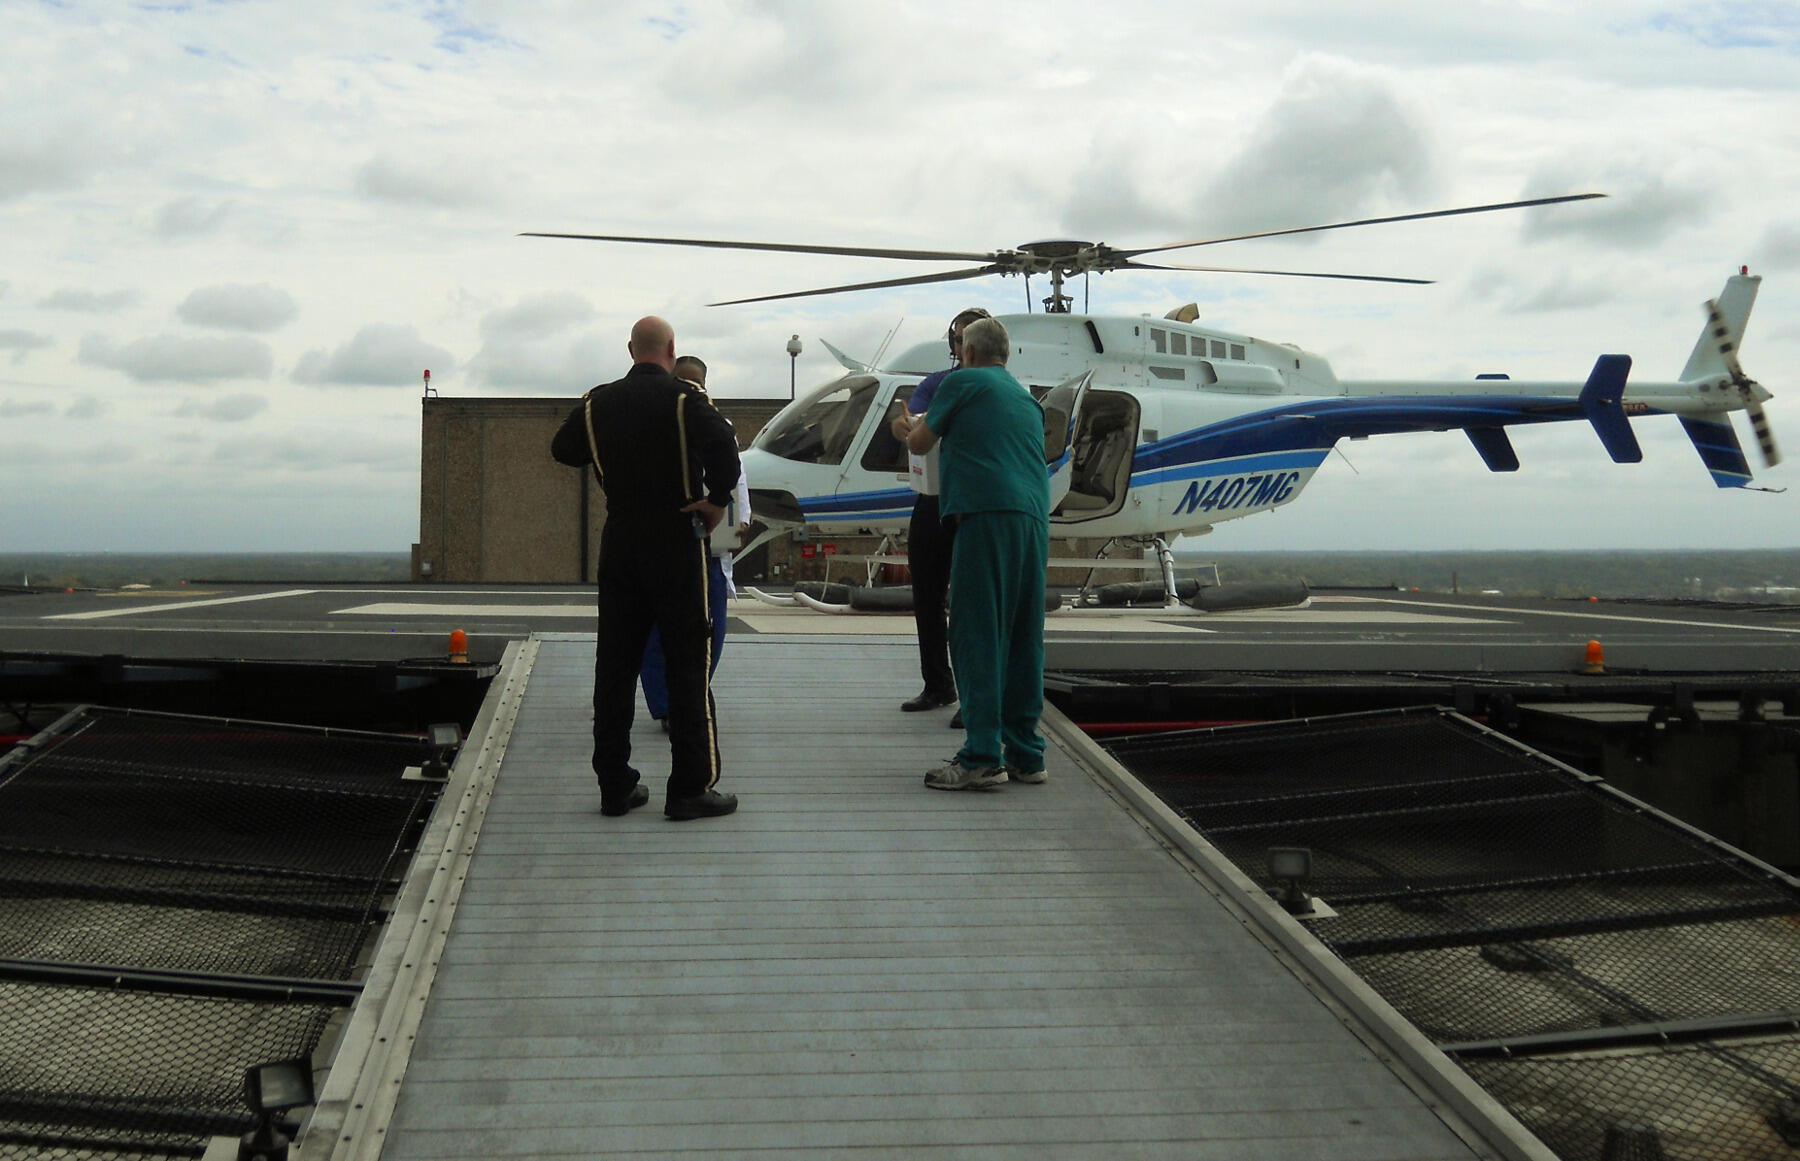 VCU Health and Johns Hopkins Hospital personnel swap kidneys at the helipad at VCU Medical Center.
<br>Photo by Maureen Bell